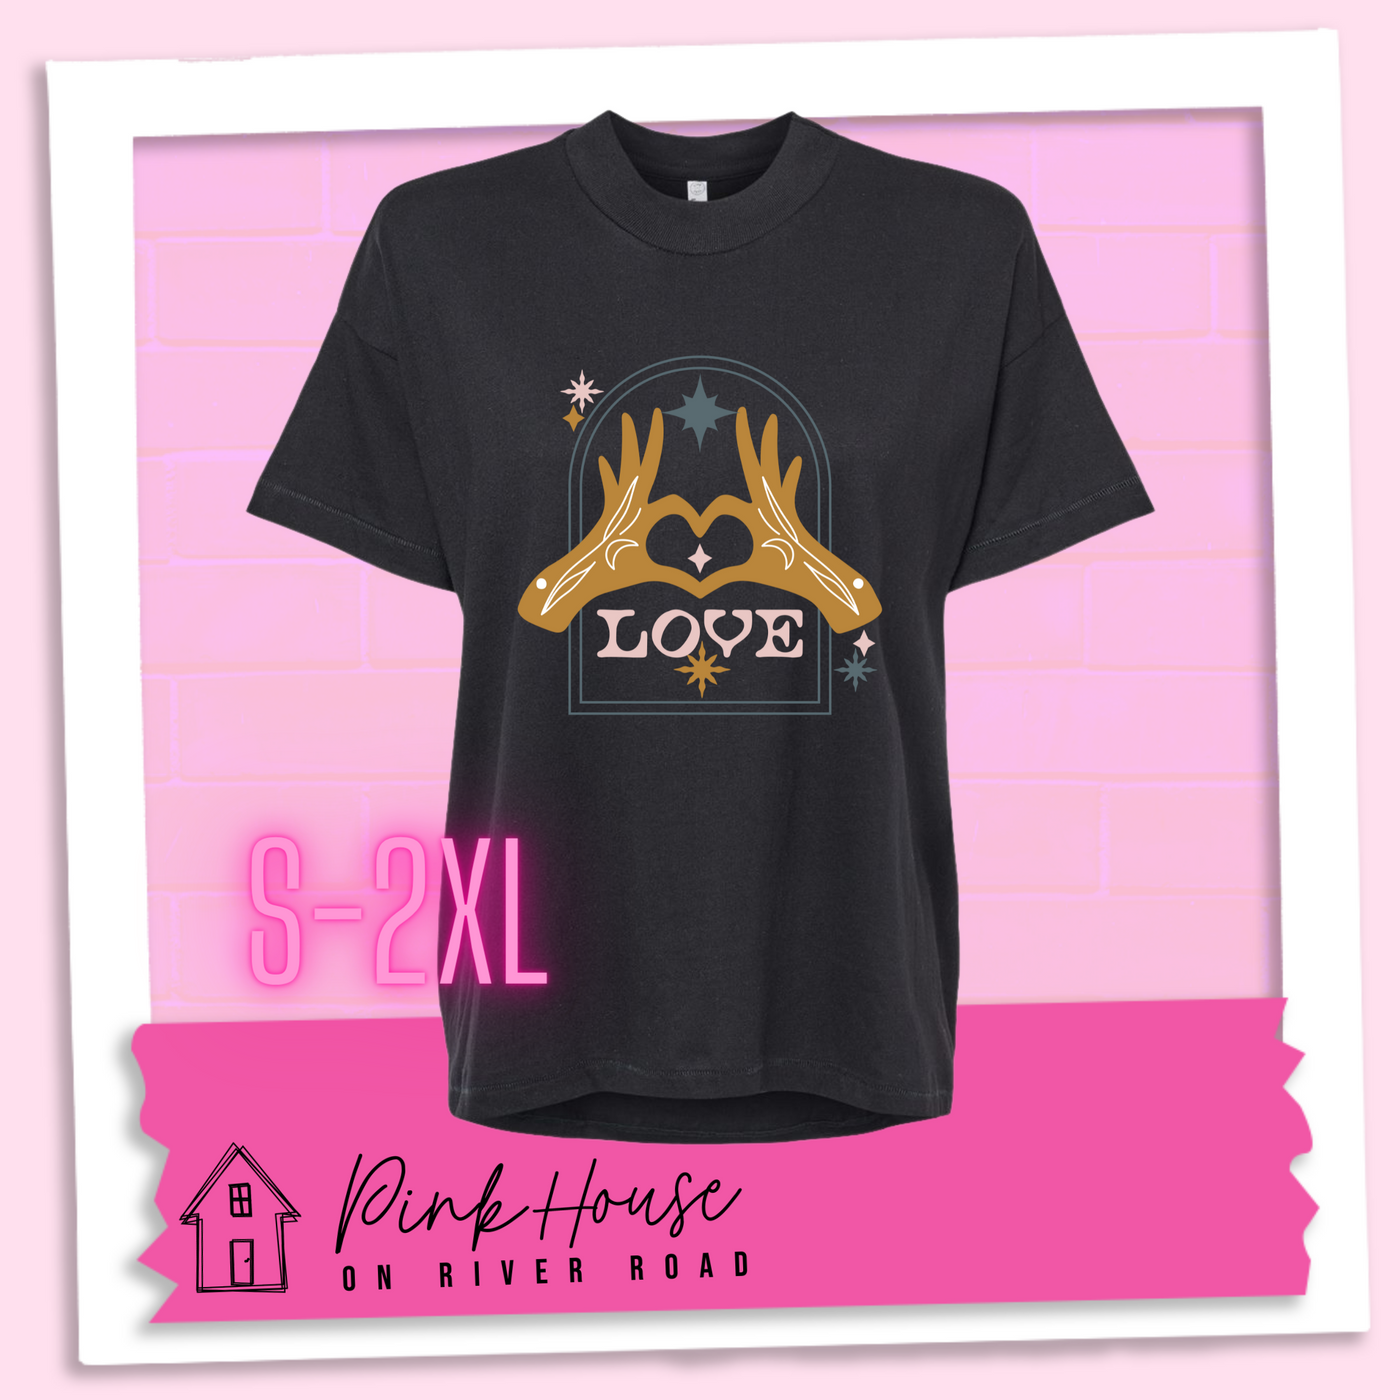 Black oversized HiLo Shirt with a graphic. Graphic is of two tattooed hands making a heart in front of an archway with stars and the word Love in the archway.